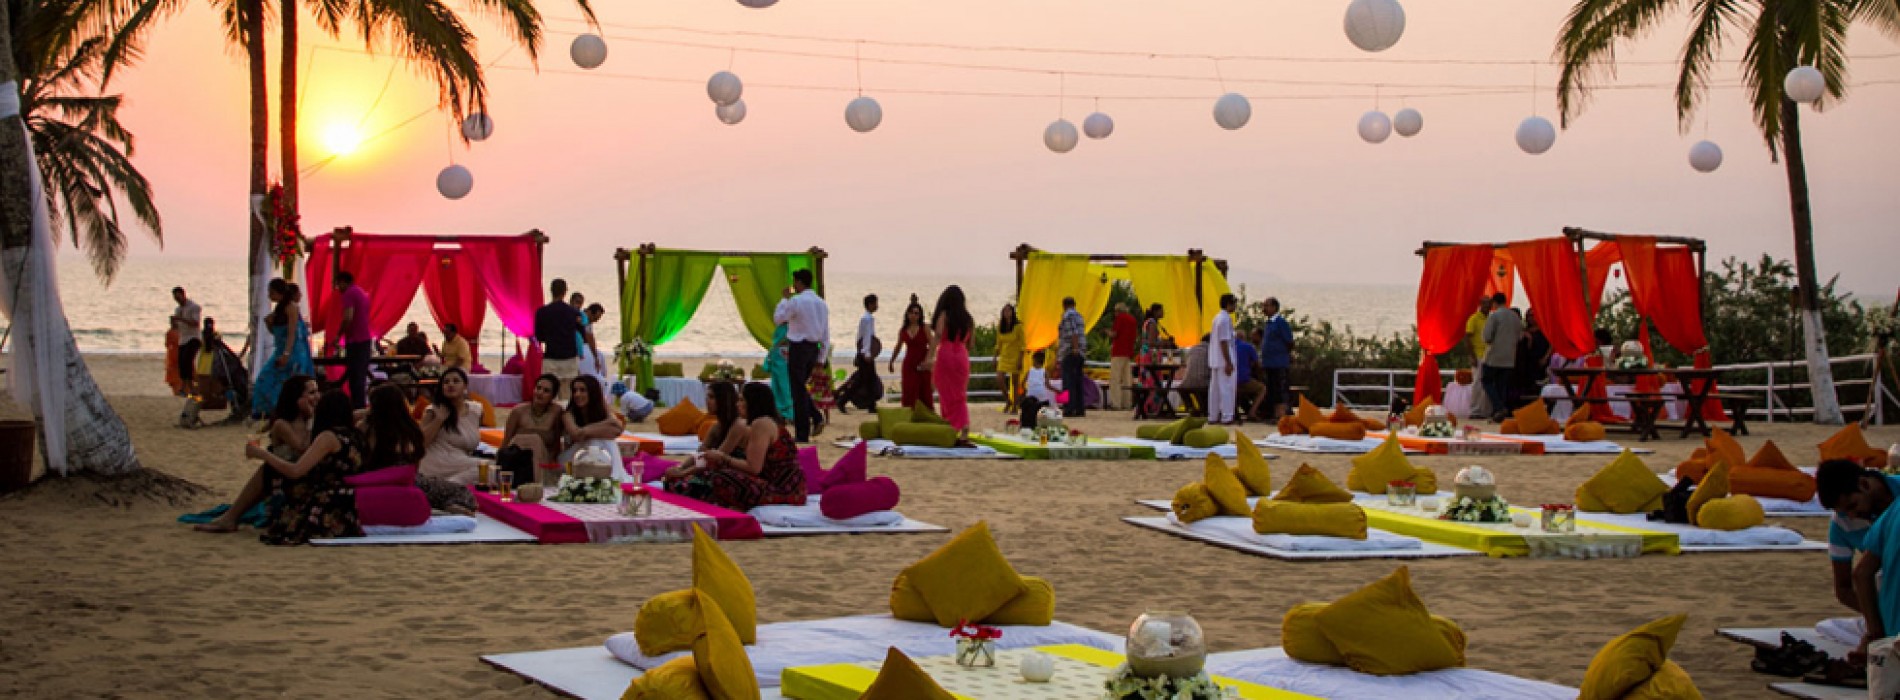 NEW FADS IN THE DESTINATION WEDDING MARKET TO WATCH OUT FOR